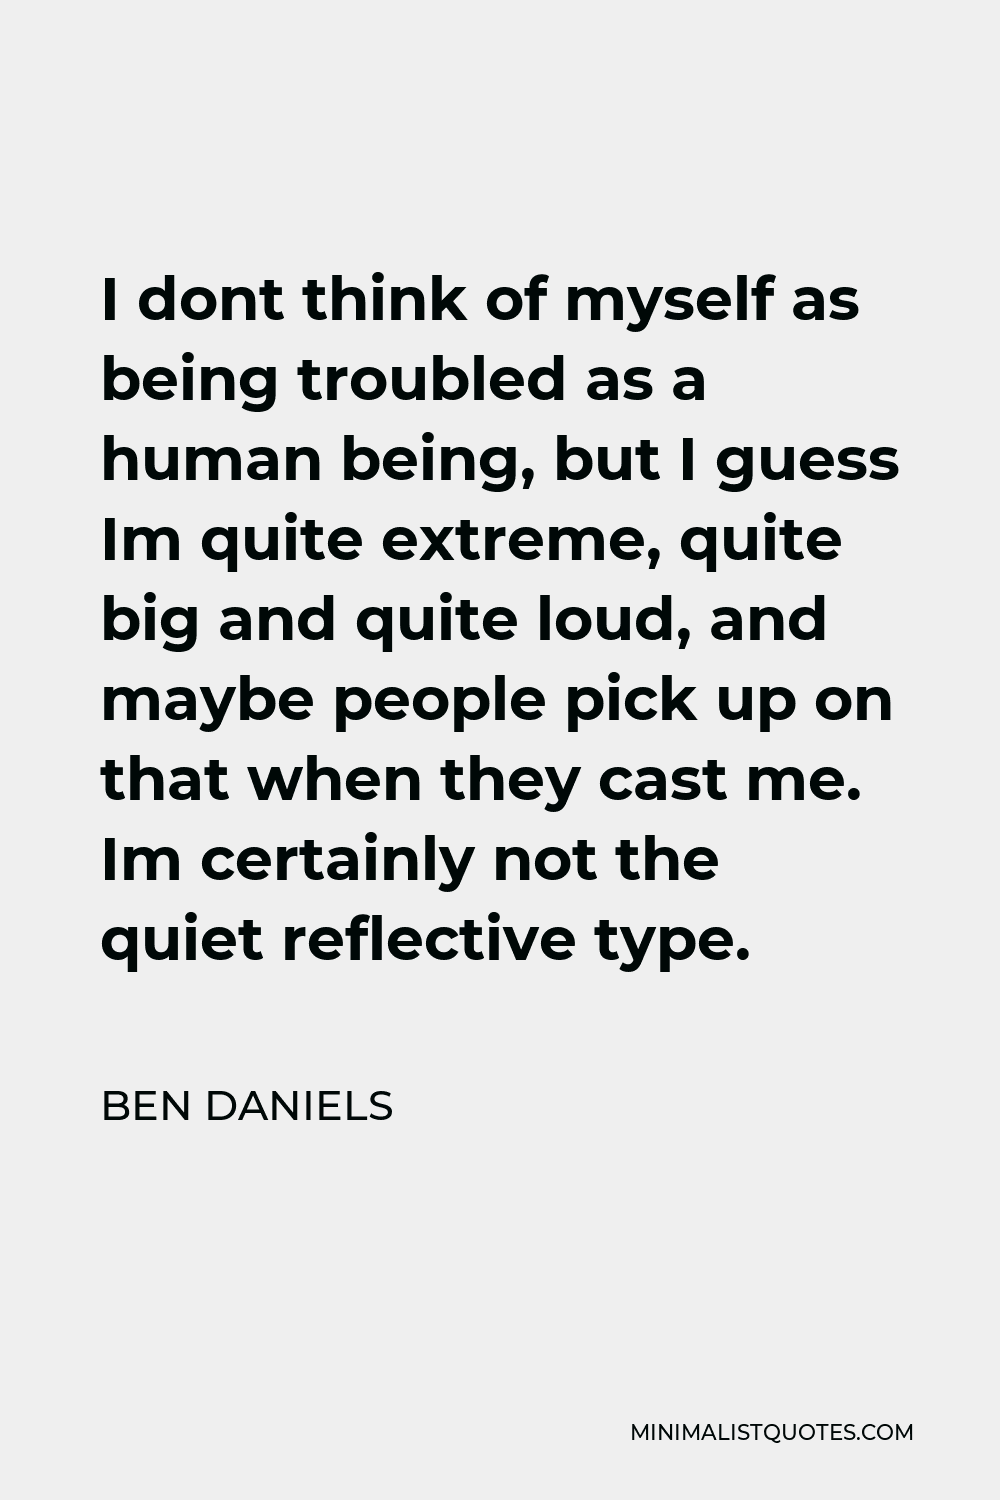 Ben Daniels Quote - I dont think of myself as being troubled as a human being, but I guess Im quite extreme, quite big and quite loud, and maybe people pick up on that when they cast me. Im certainly not the quiet reflective type.